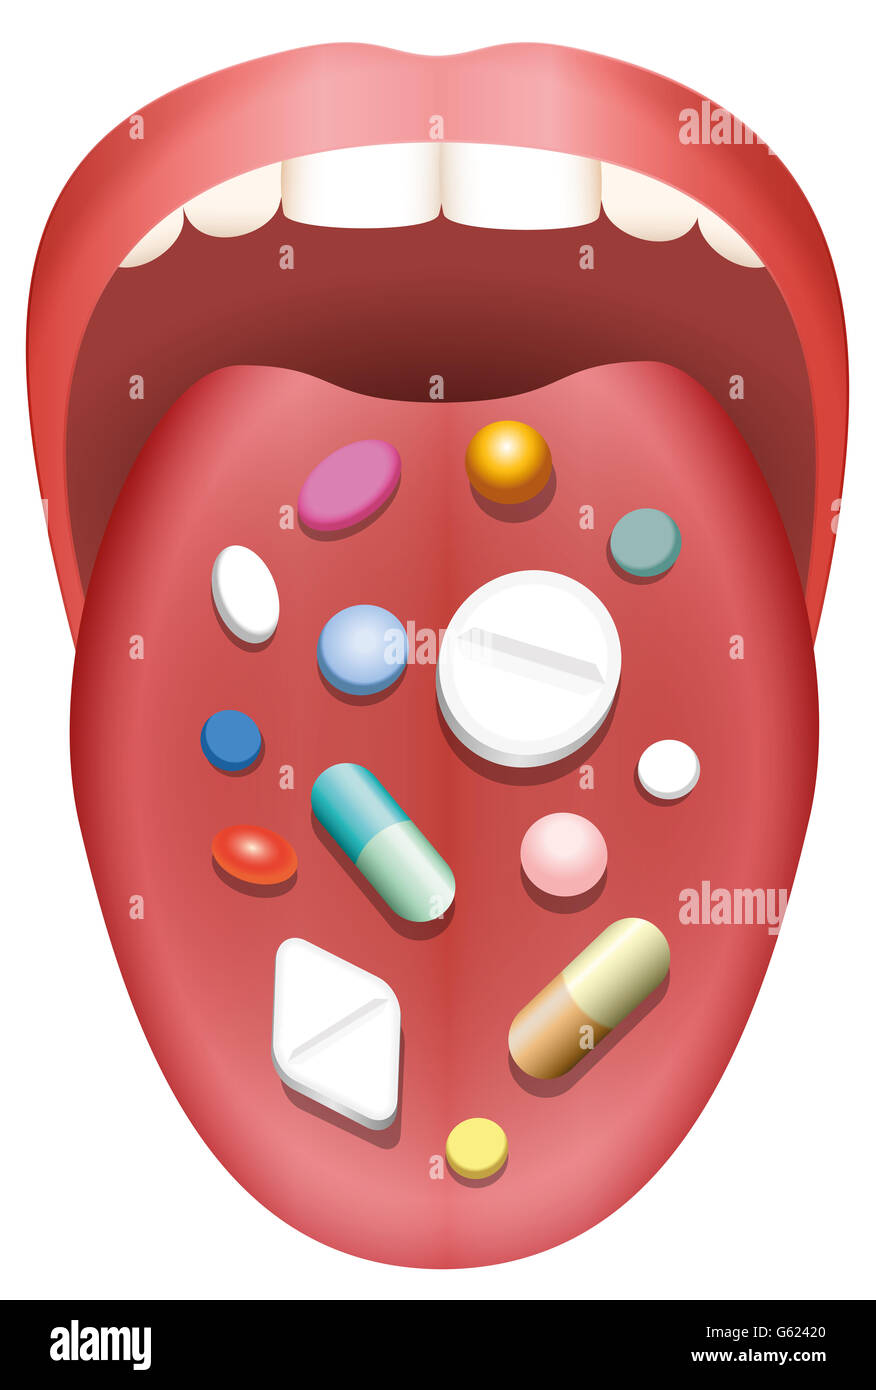 Pills and capsules distributed on a stuck out tongue of a patient. Illustration on white background. Stock Photo